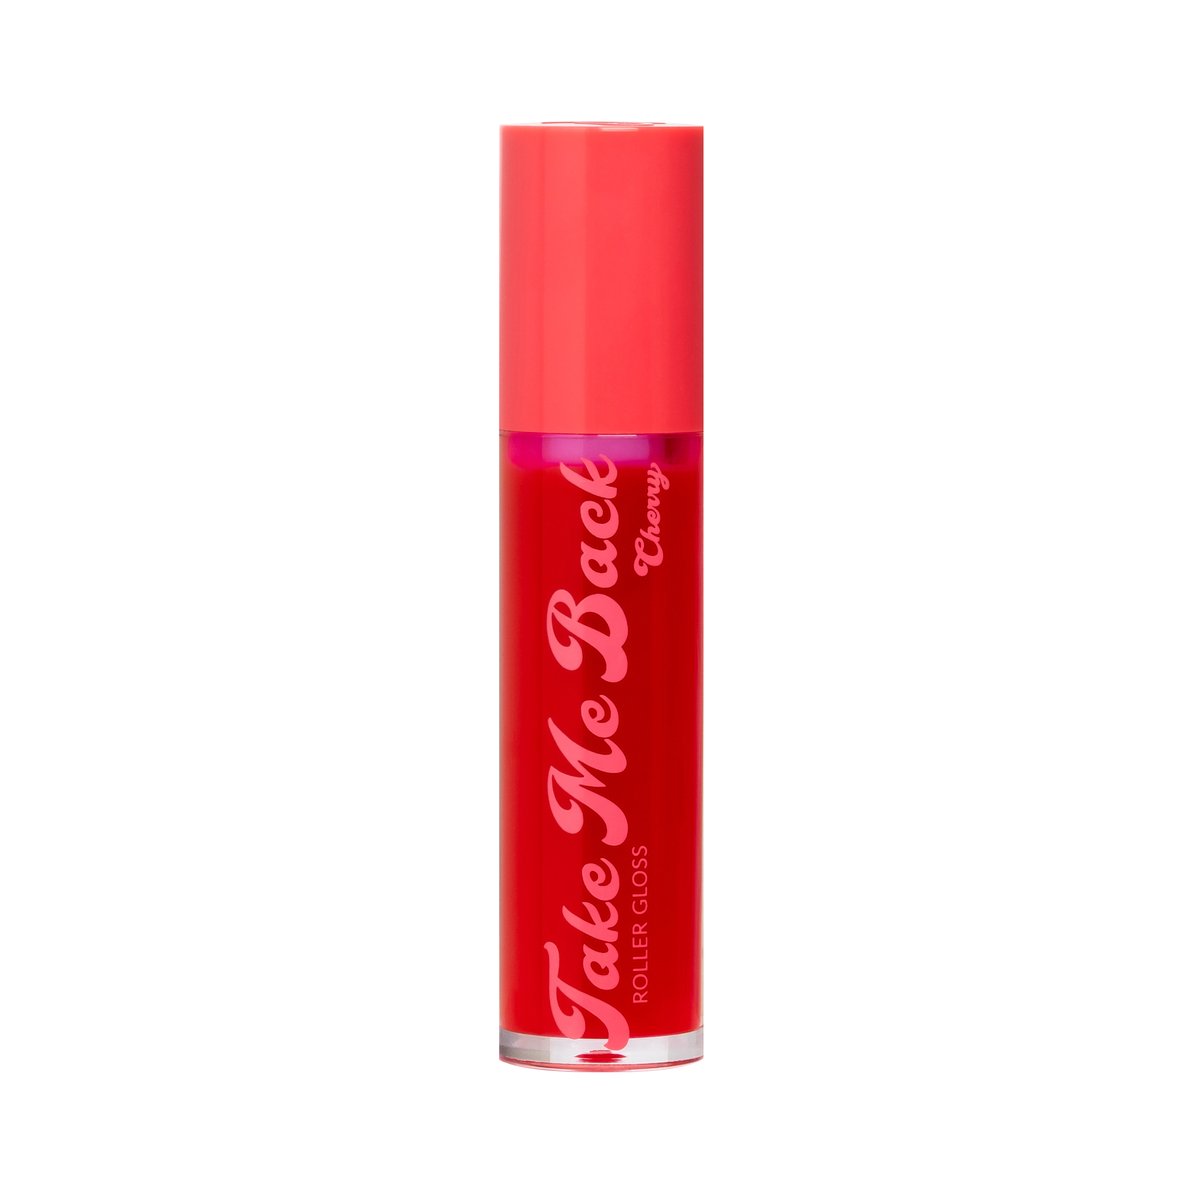 Beauty Creations - Take Me Back Roller Gloss Cherry